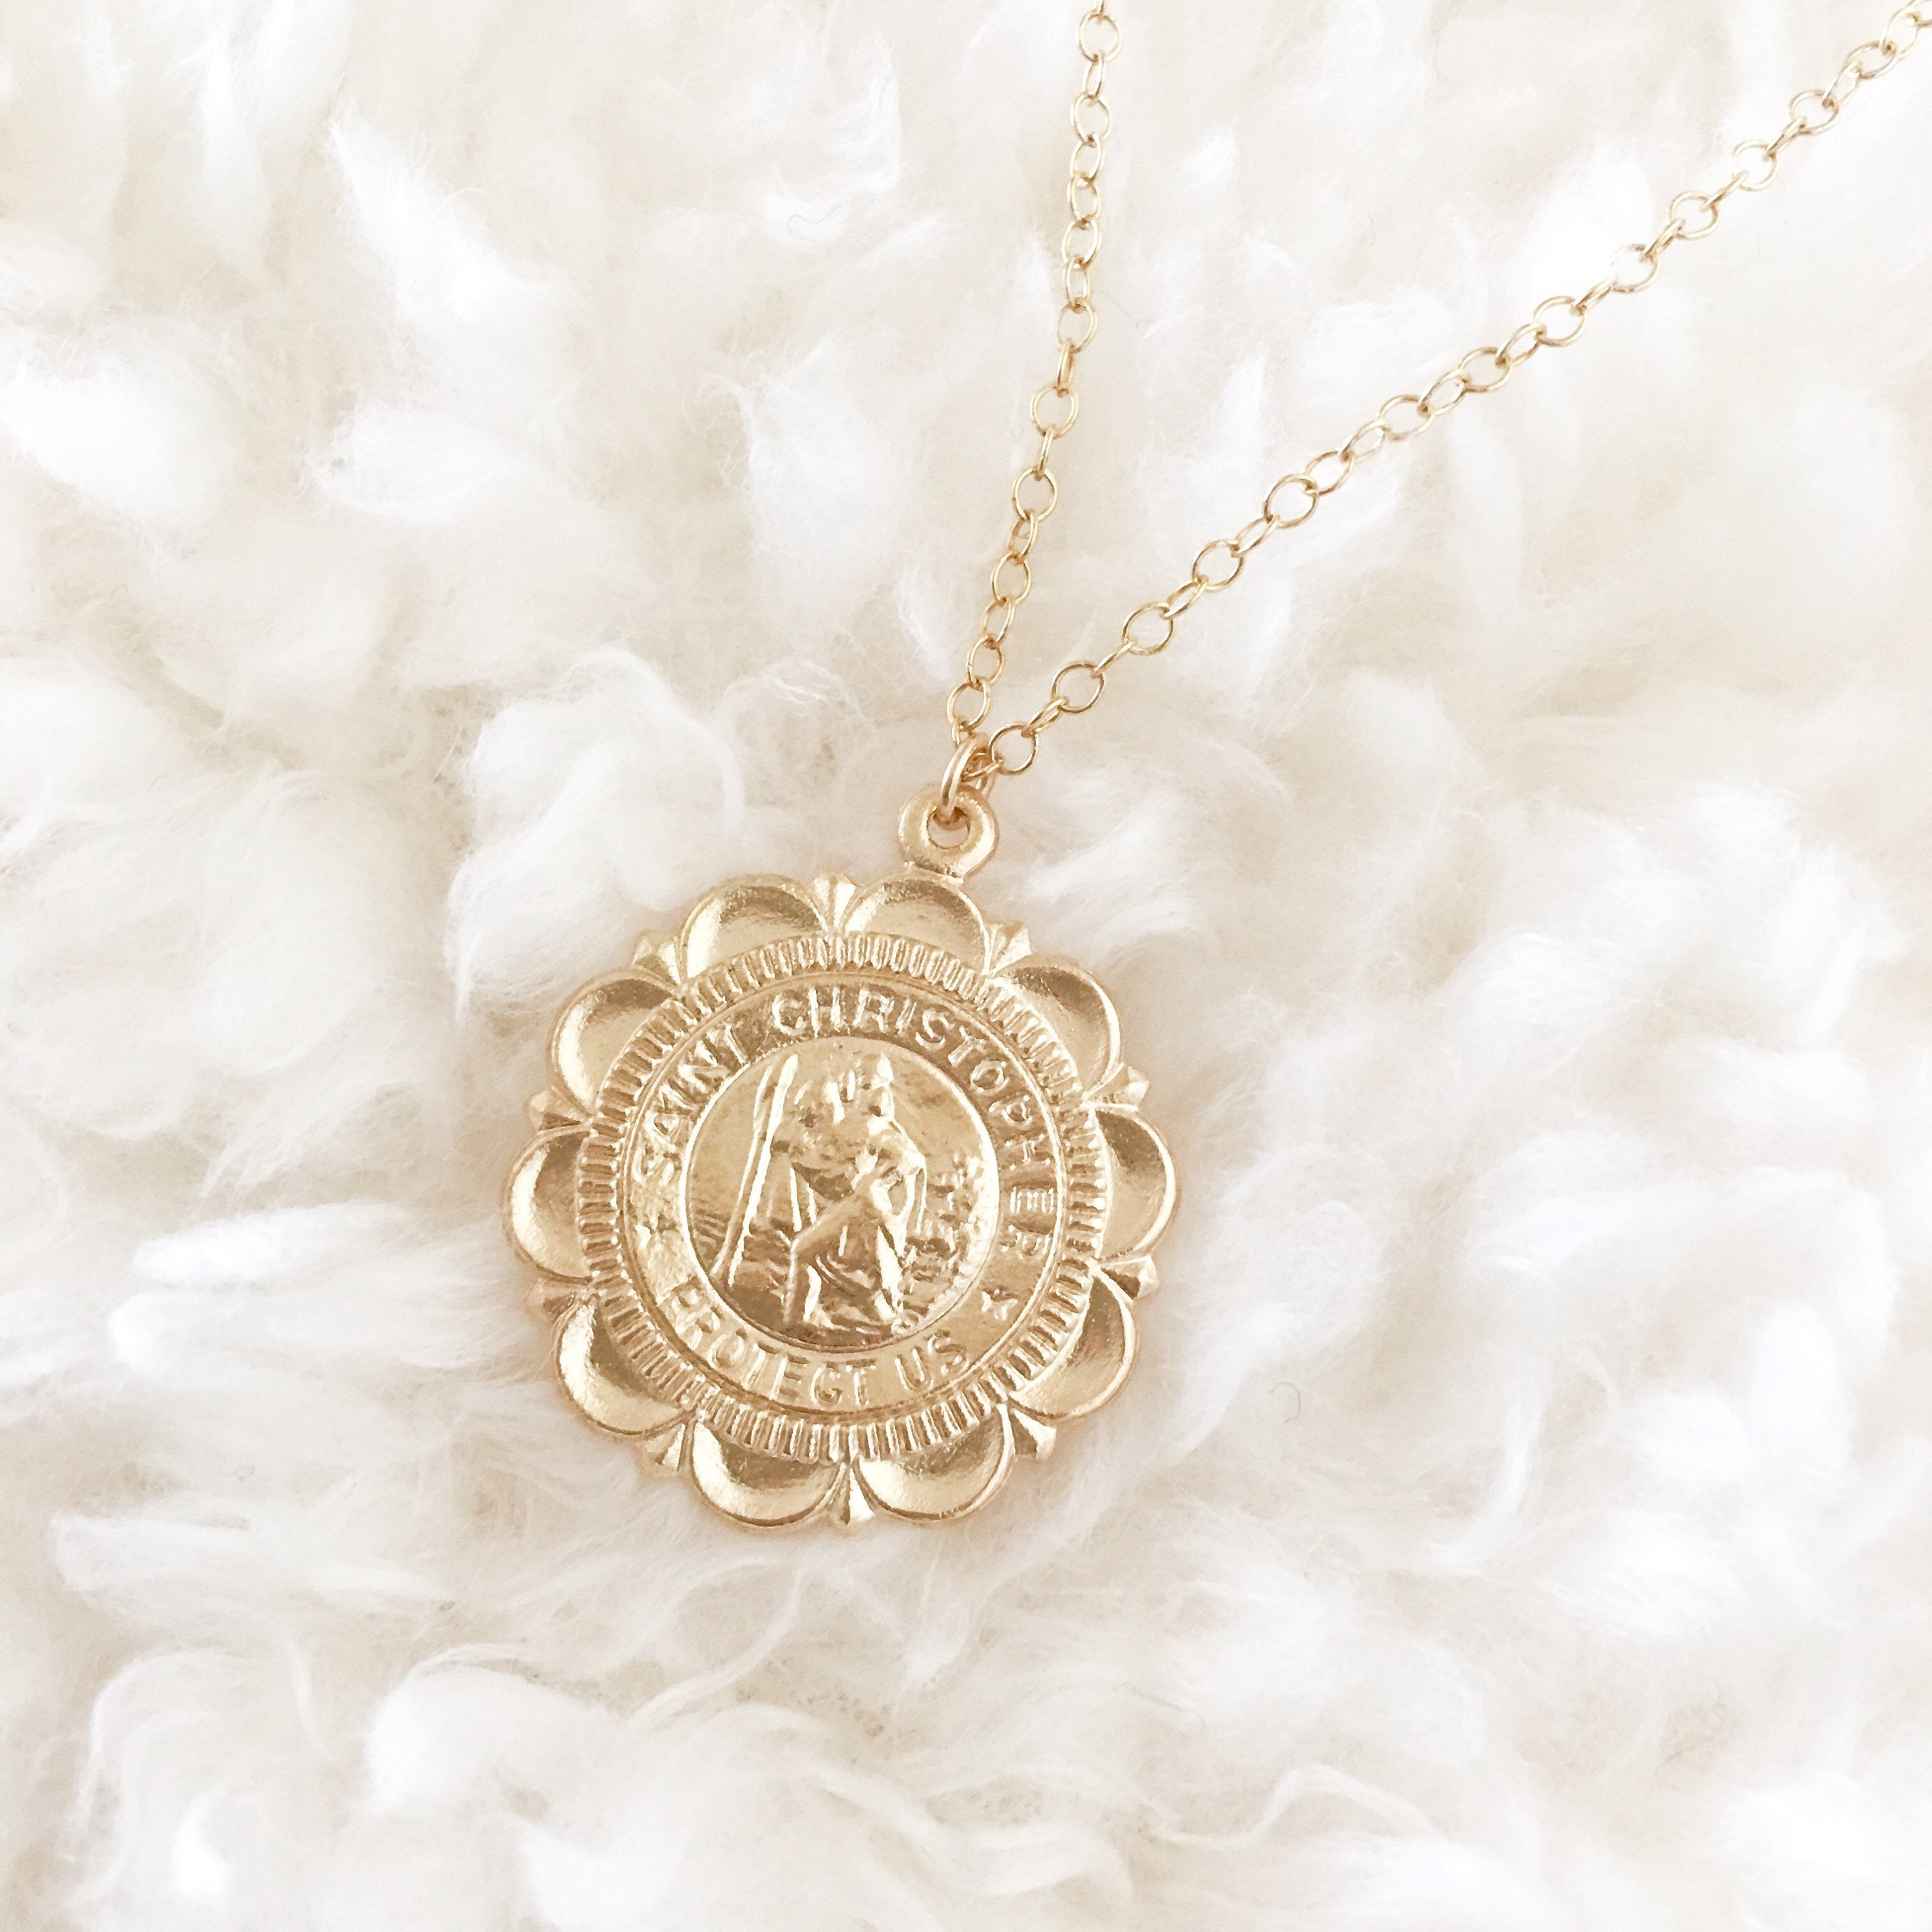 Large Coin Necklace - Gold Filled Coin Medallion, St Christopher Coin Pendant, Gold Coin Necklace, Gold Medallion Necklace |GFN00031